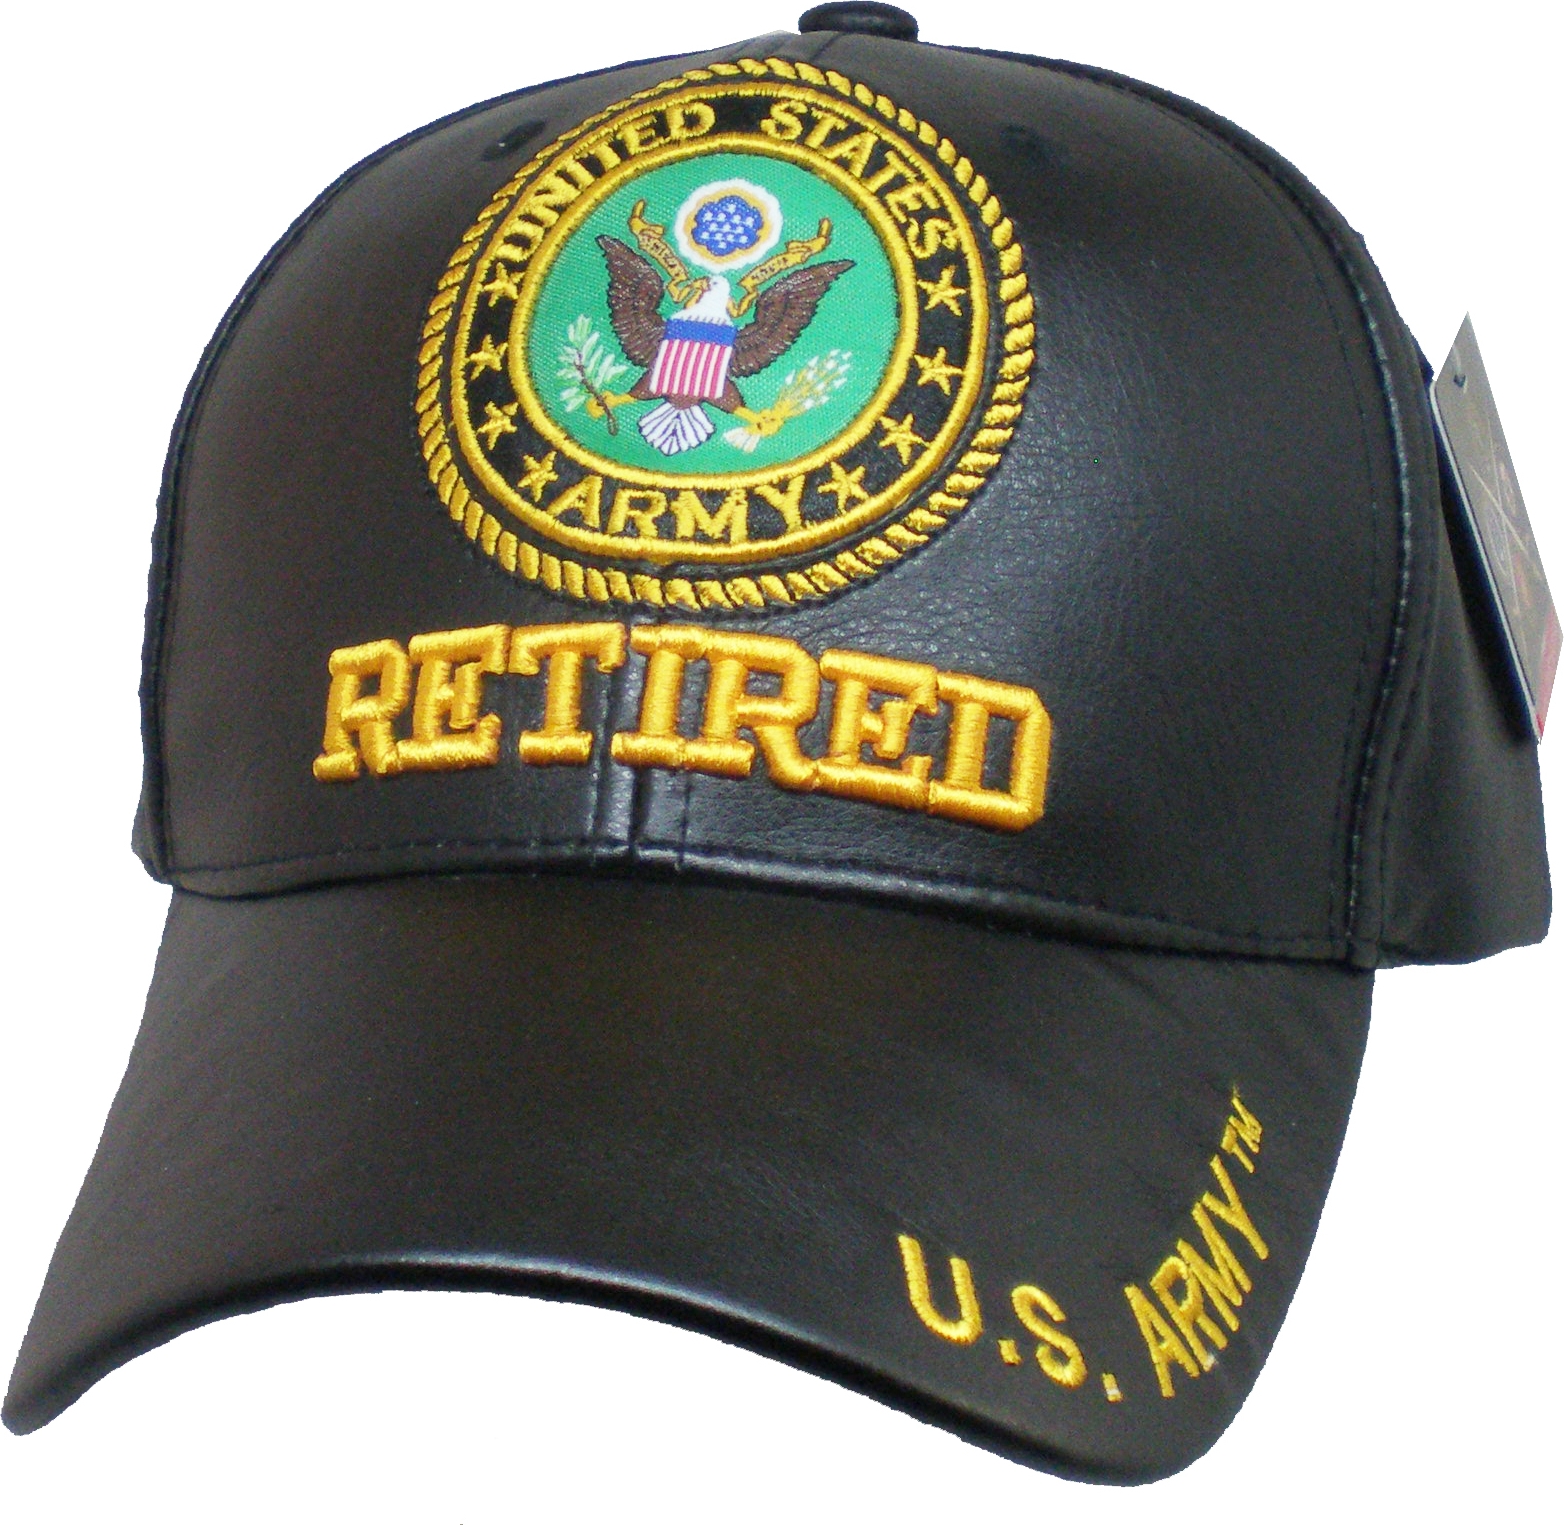 Army Retired Caps - Army Military